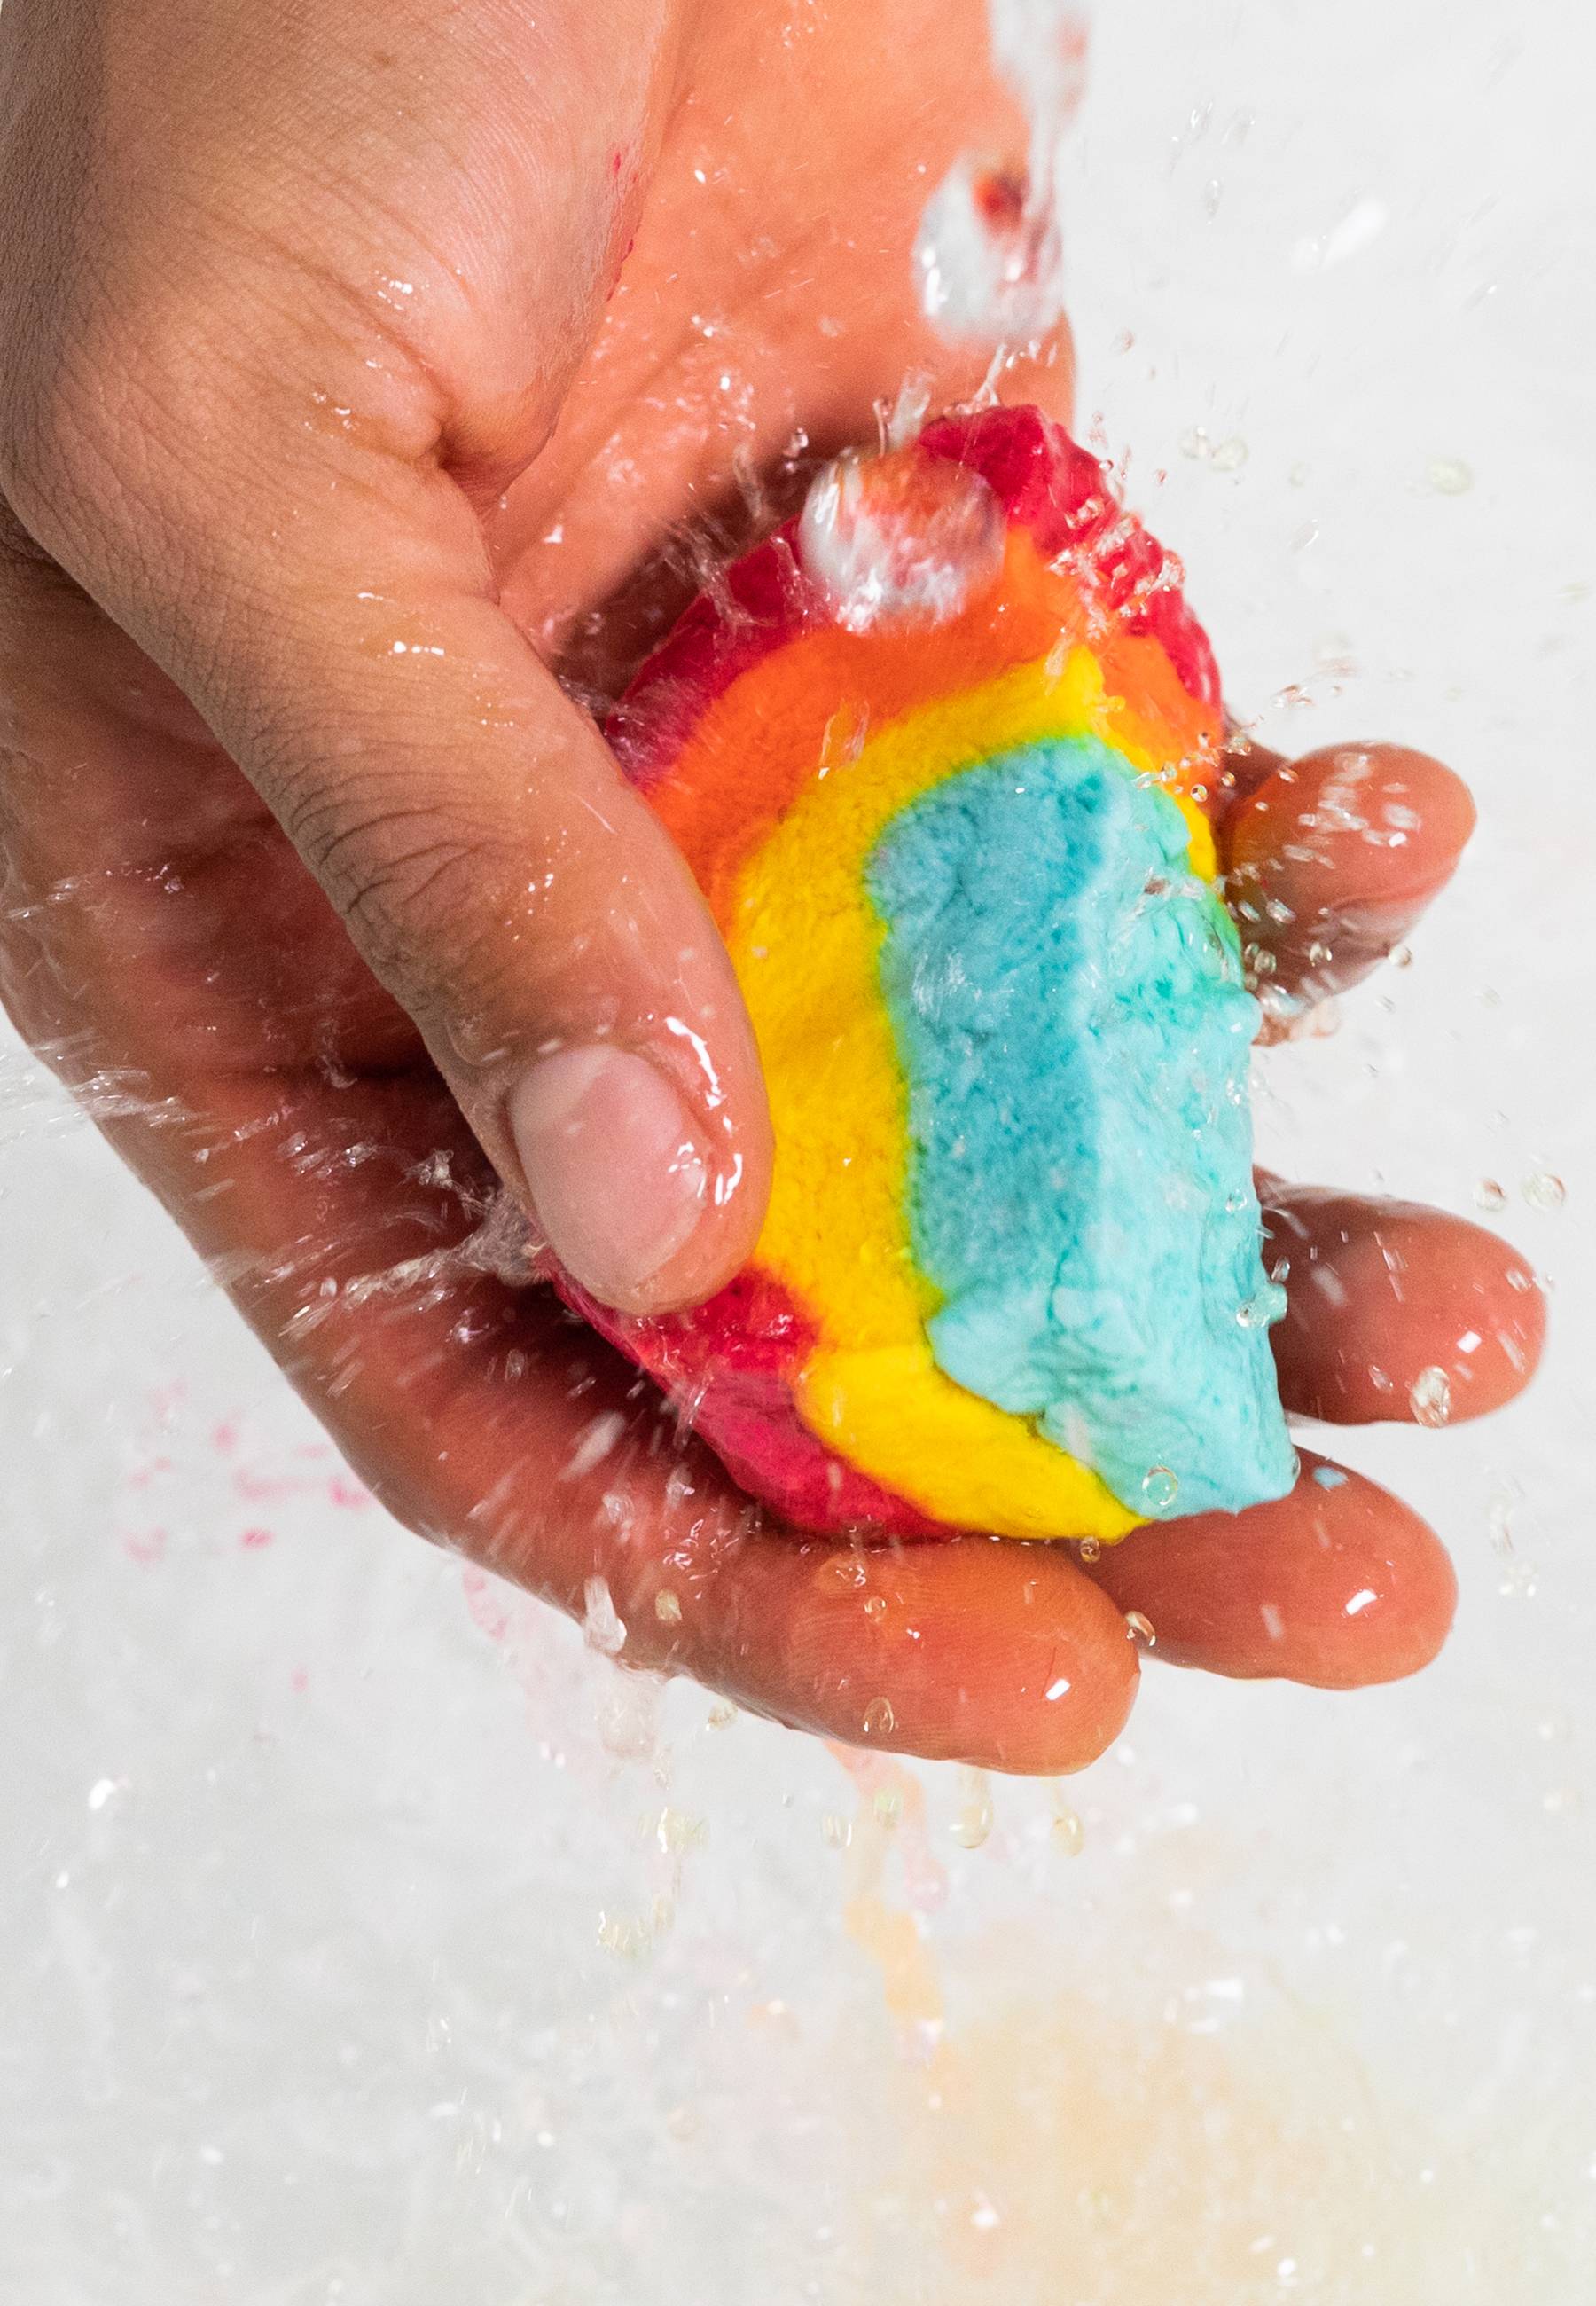 The image shows a close-up of the model's hand gently crumbling the mini Rainbow bubble bar under running water. 